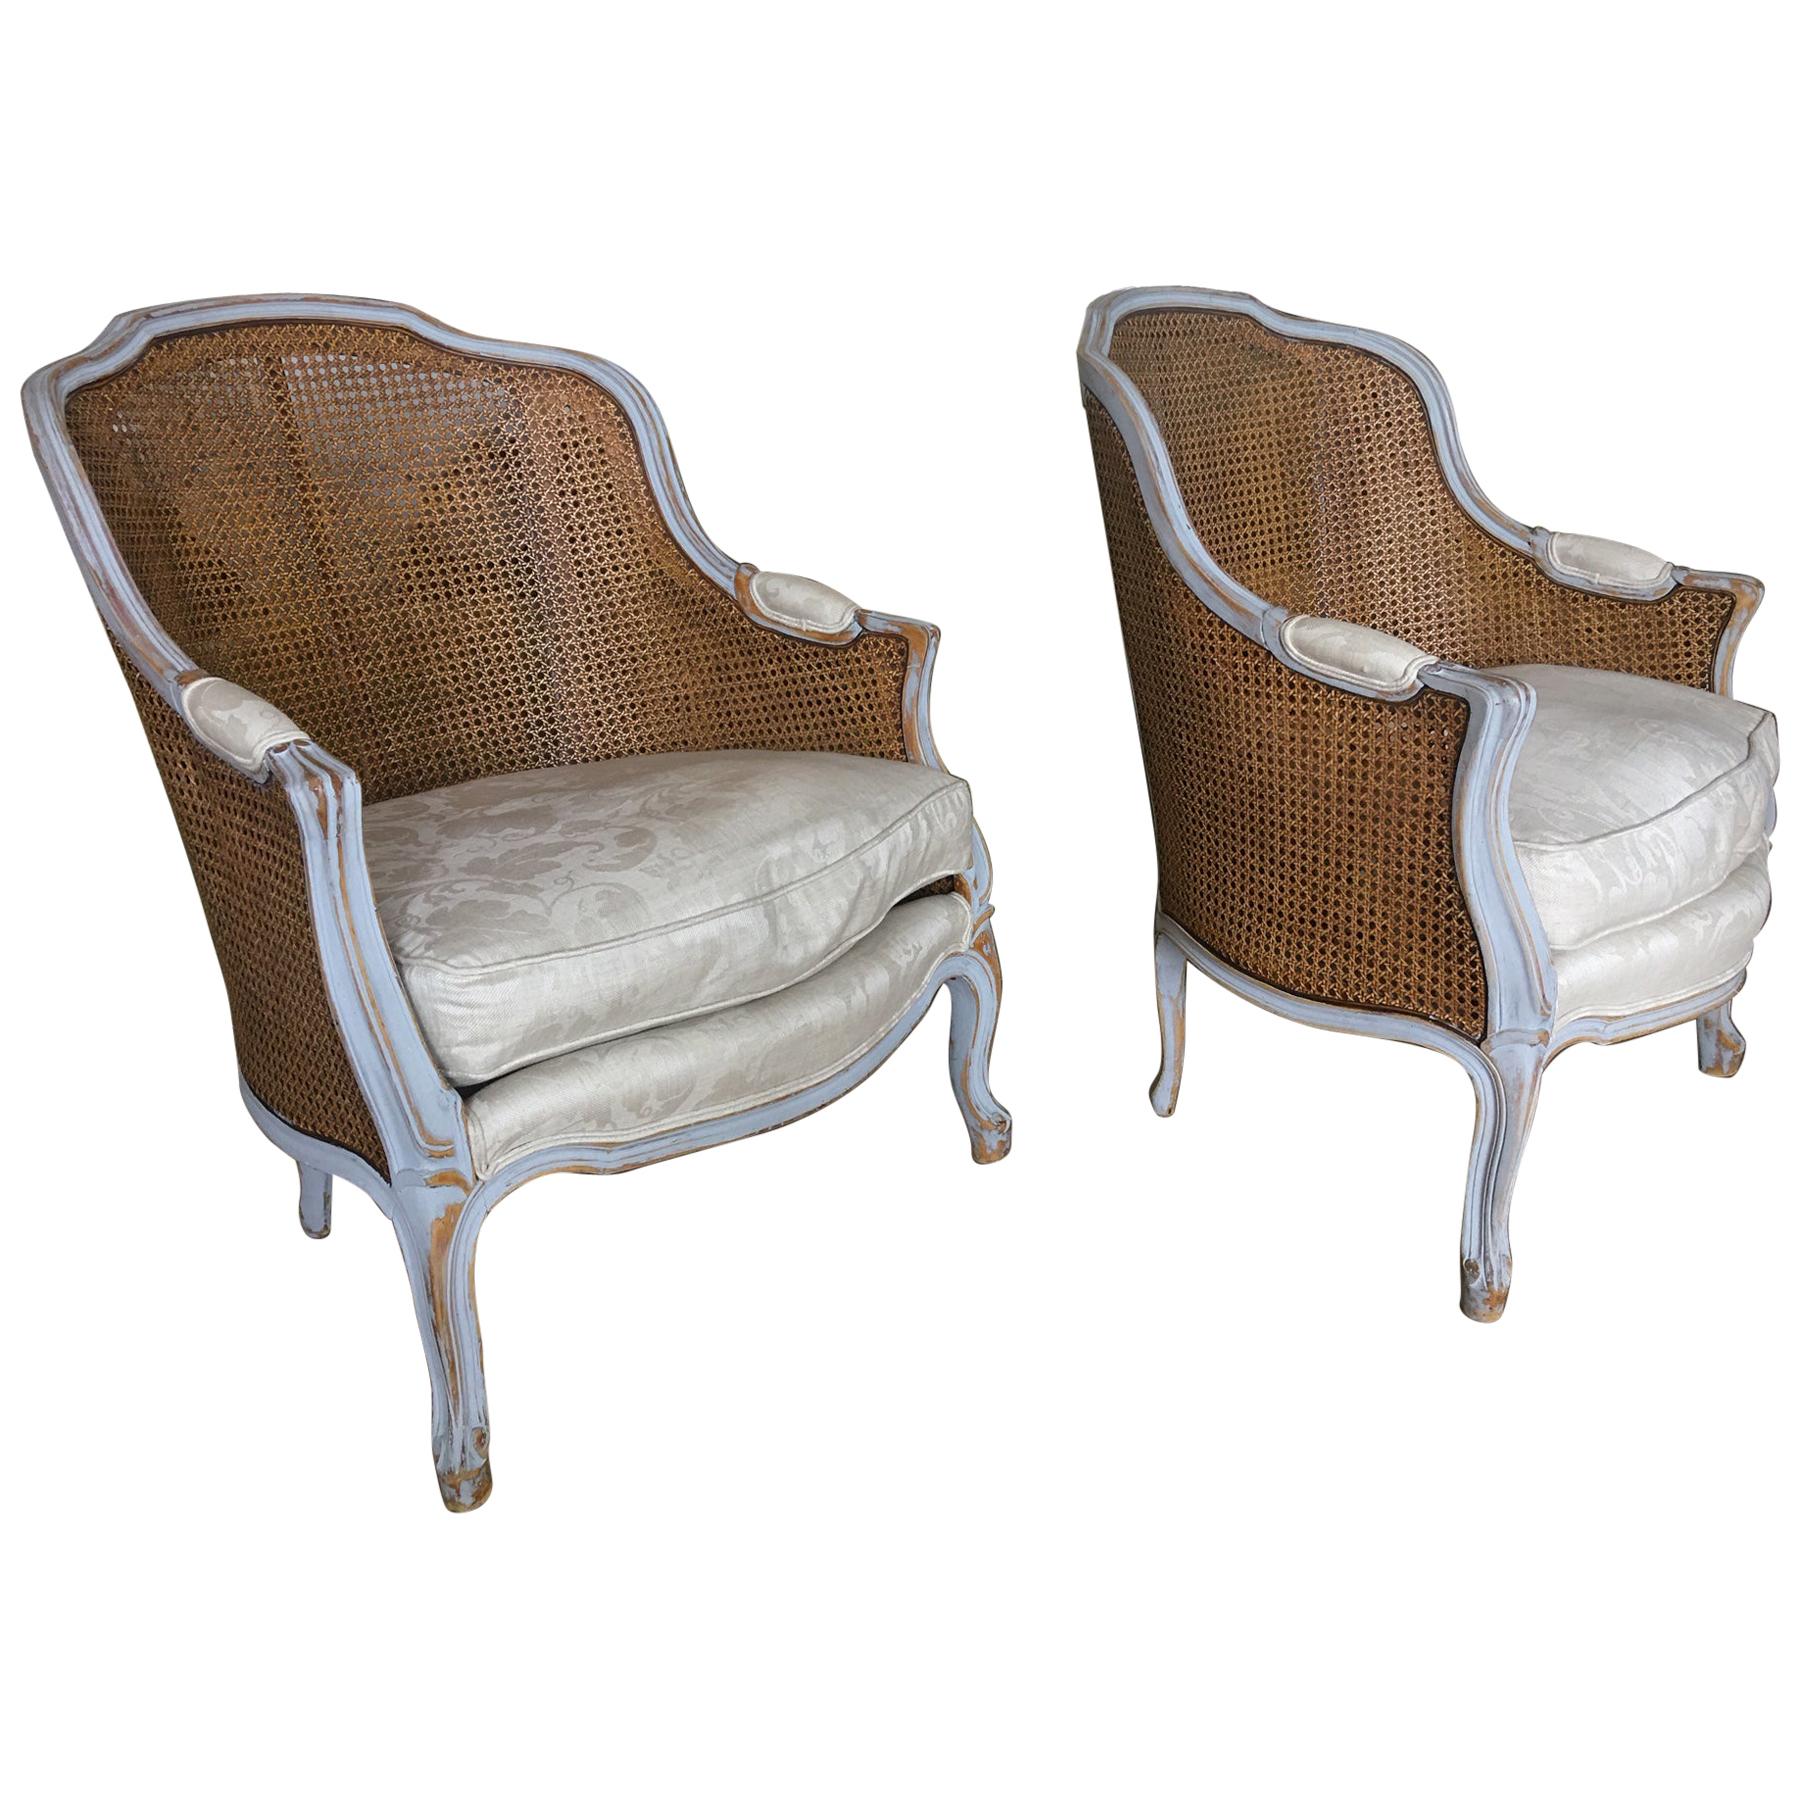 Pair of Painted Louis XVI Style Cane Back Side Chairs, Early 20th Century